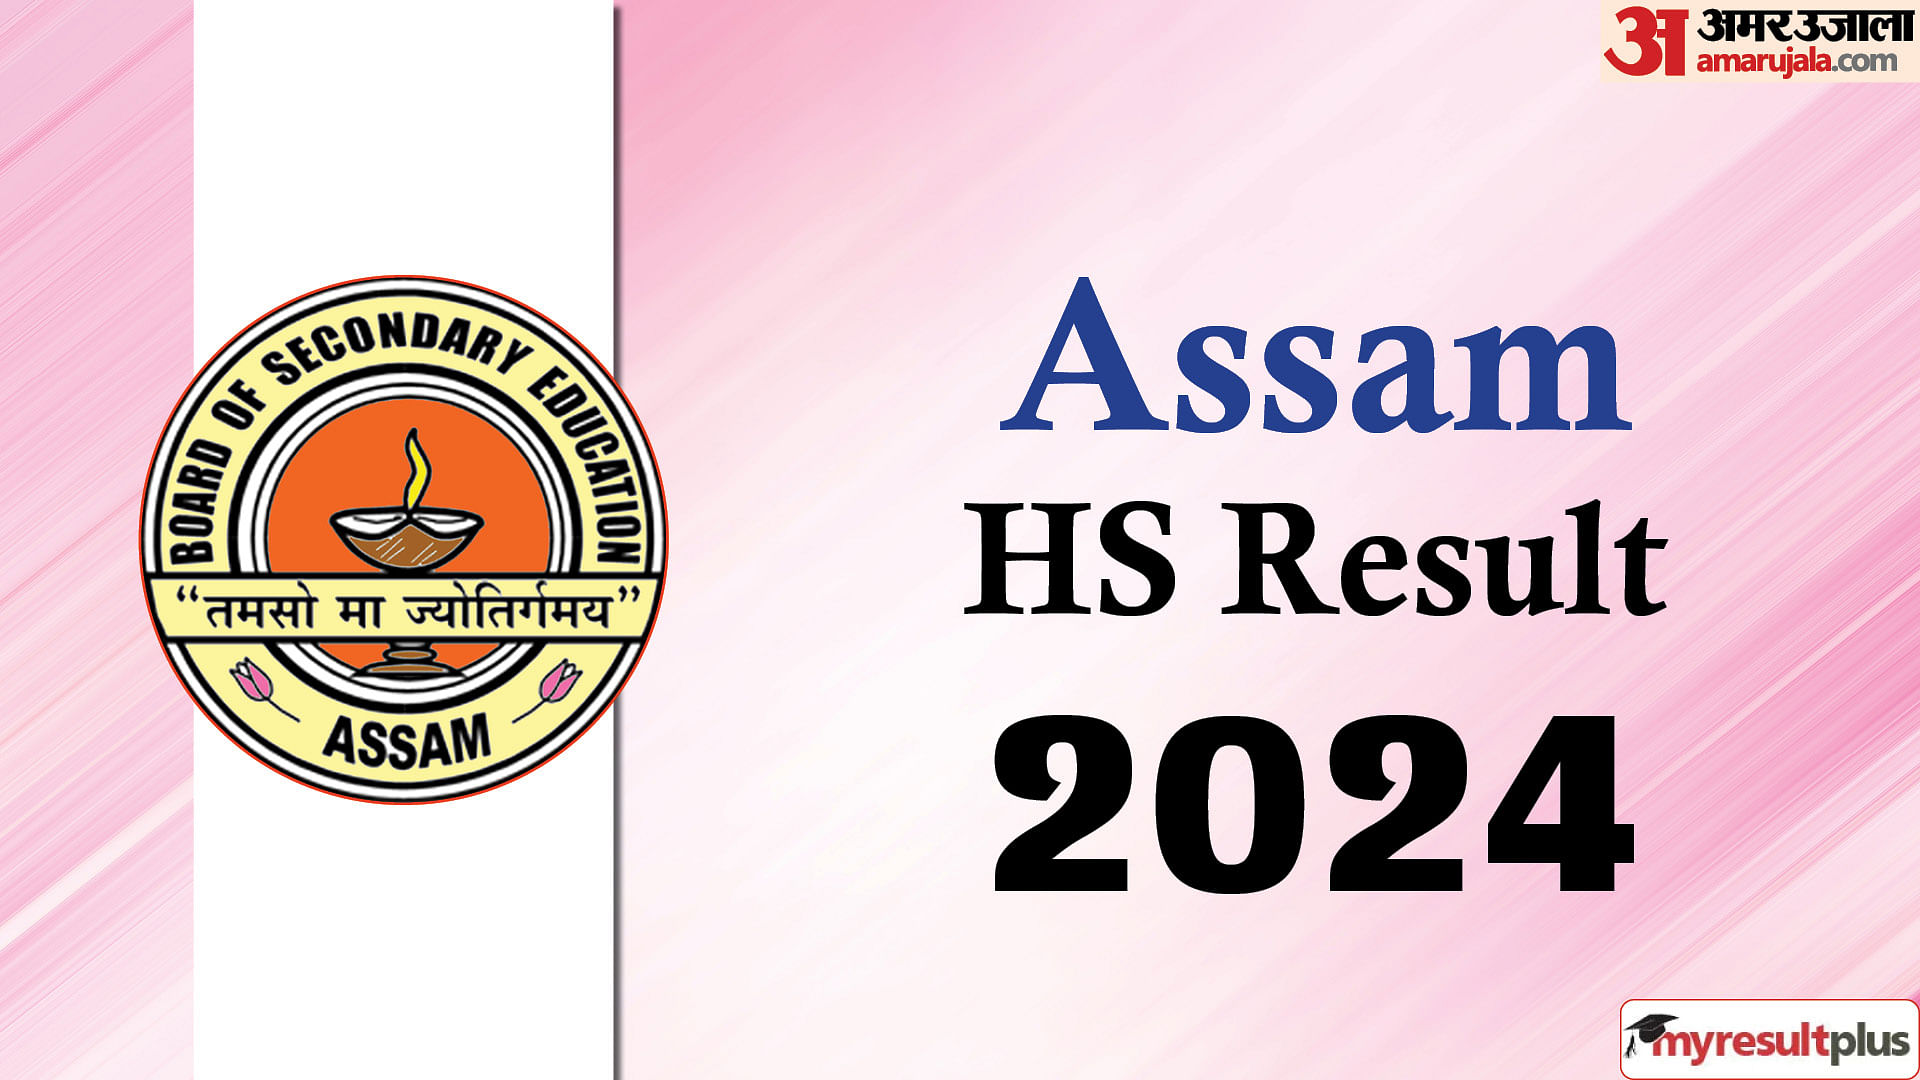 Assam HS Result 2024 out now, Read about the stream wise pass percentage and more details here